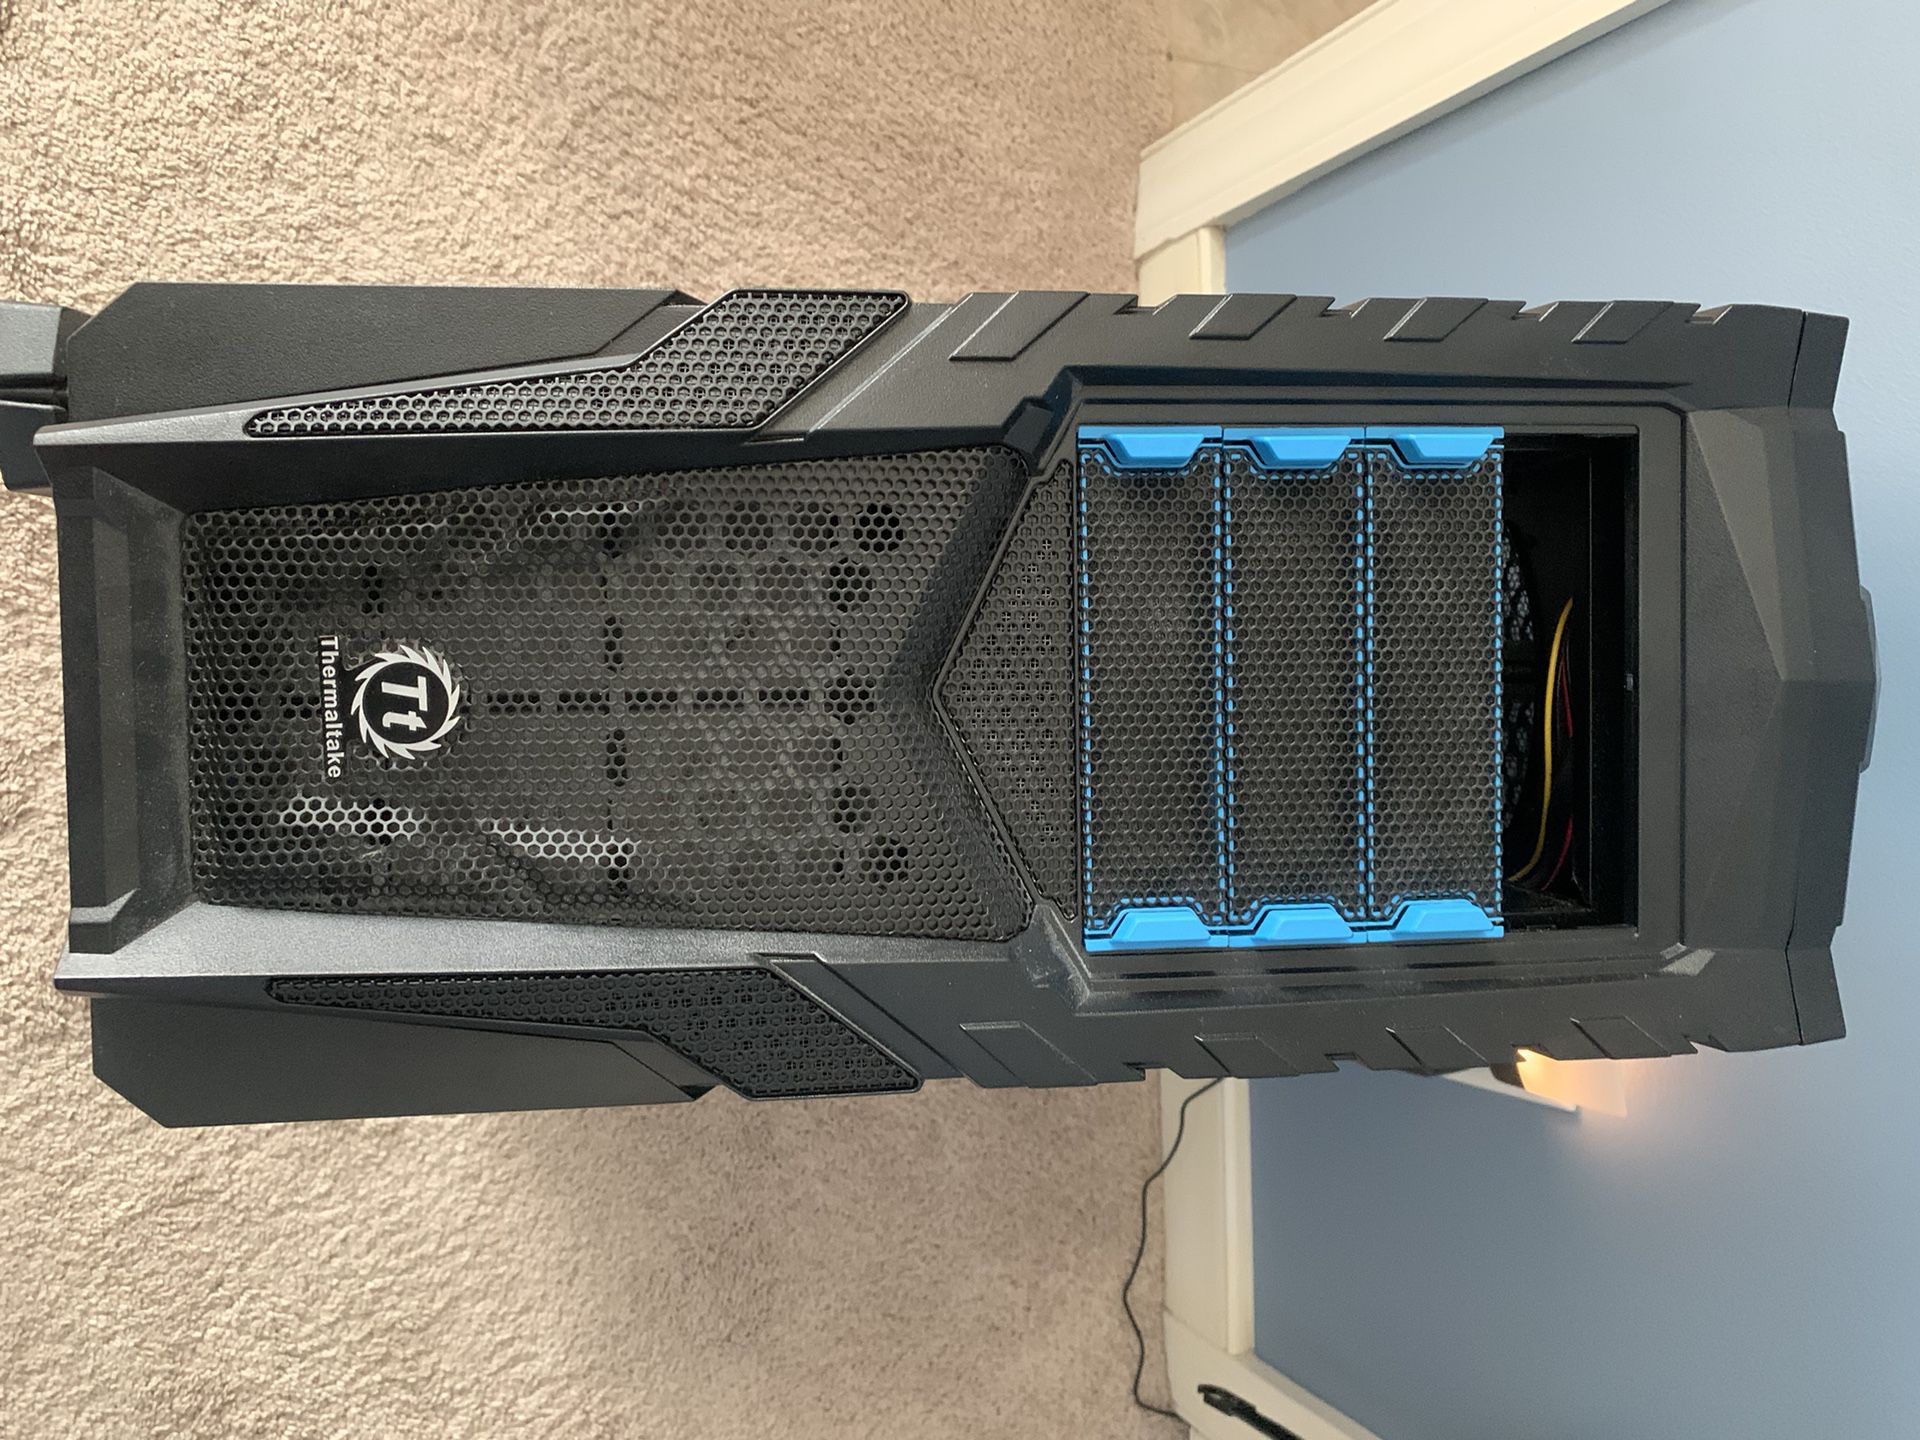 ThermalTake Full Size Gaming Tower (Case Only)